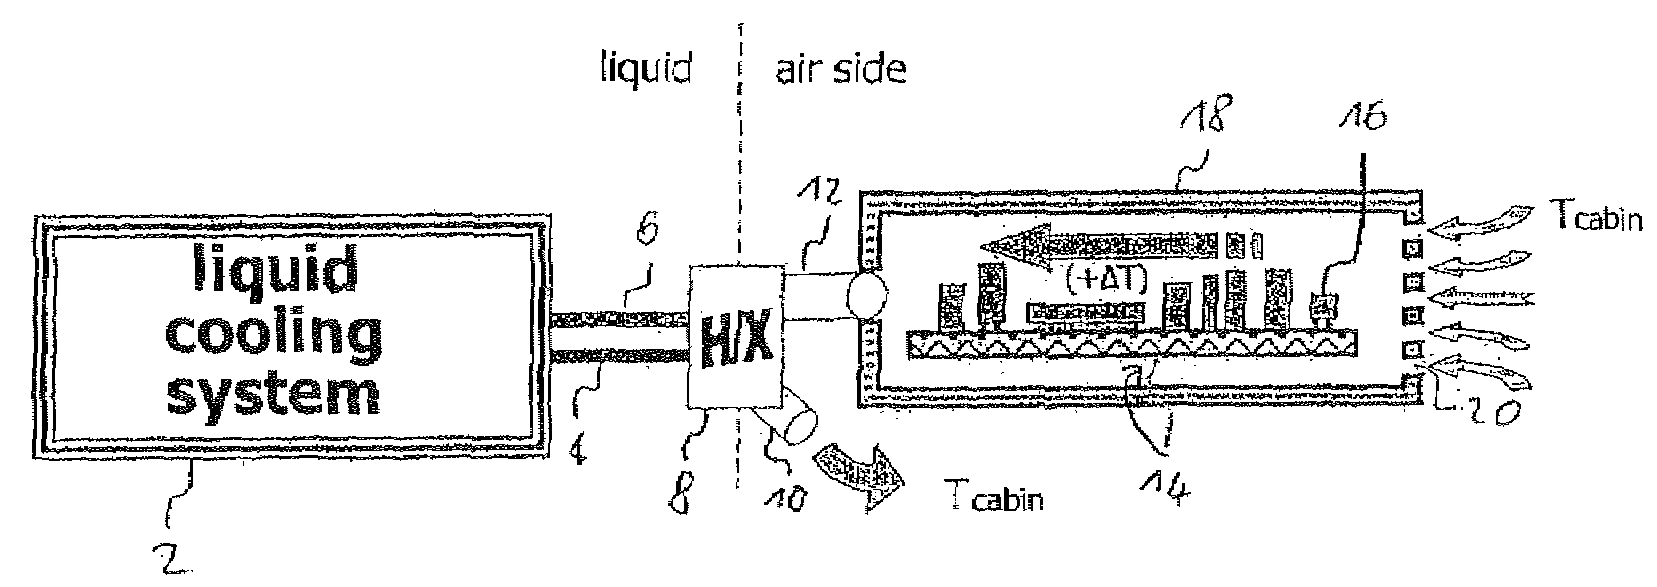 Aircraft electronics cooling apparatus for an aircraft having a liquid cooling system